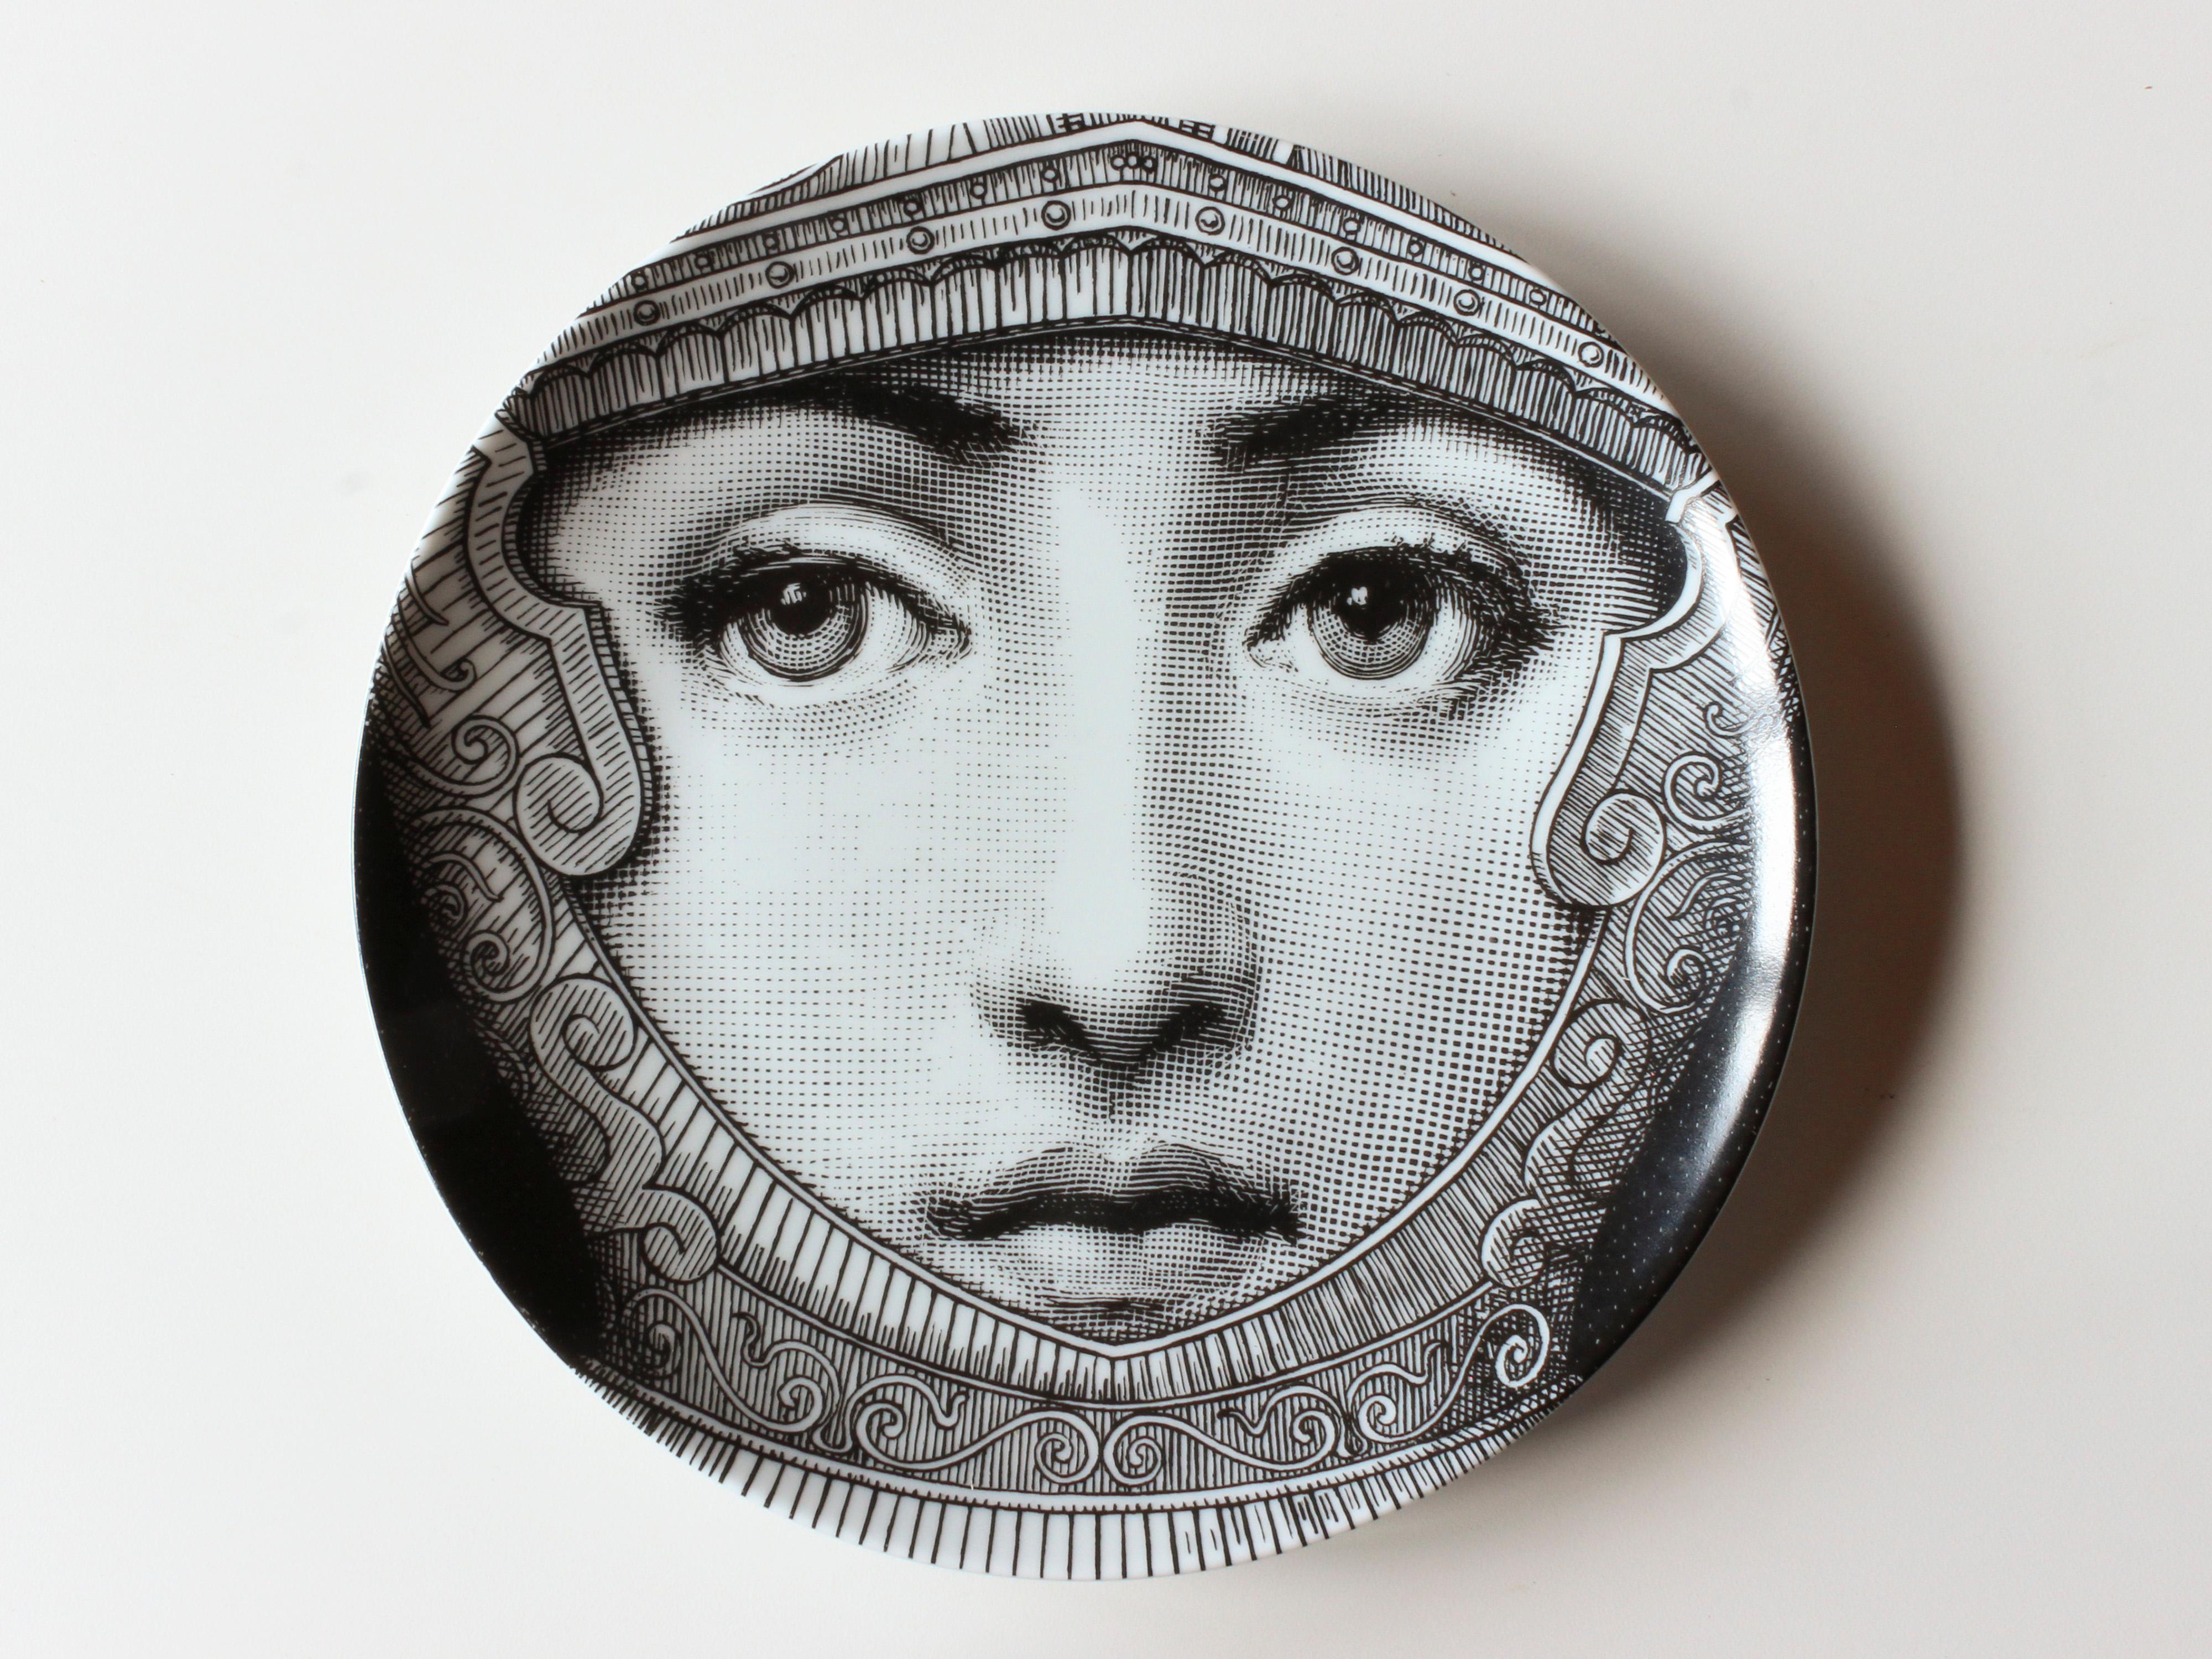 Two 1990s Fornasetti Tema e Variazioni black and white porcelain plates depicting Lina Cavalieri, the muse of Piero Fornasetti (1913-1988). Numbers 9 + 95. Very good vintage condition.